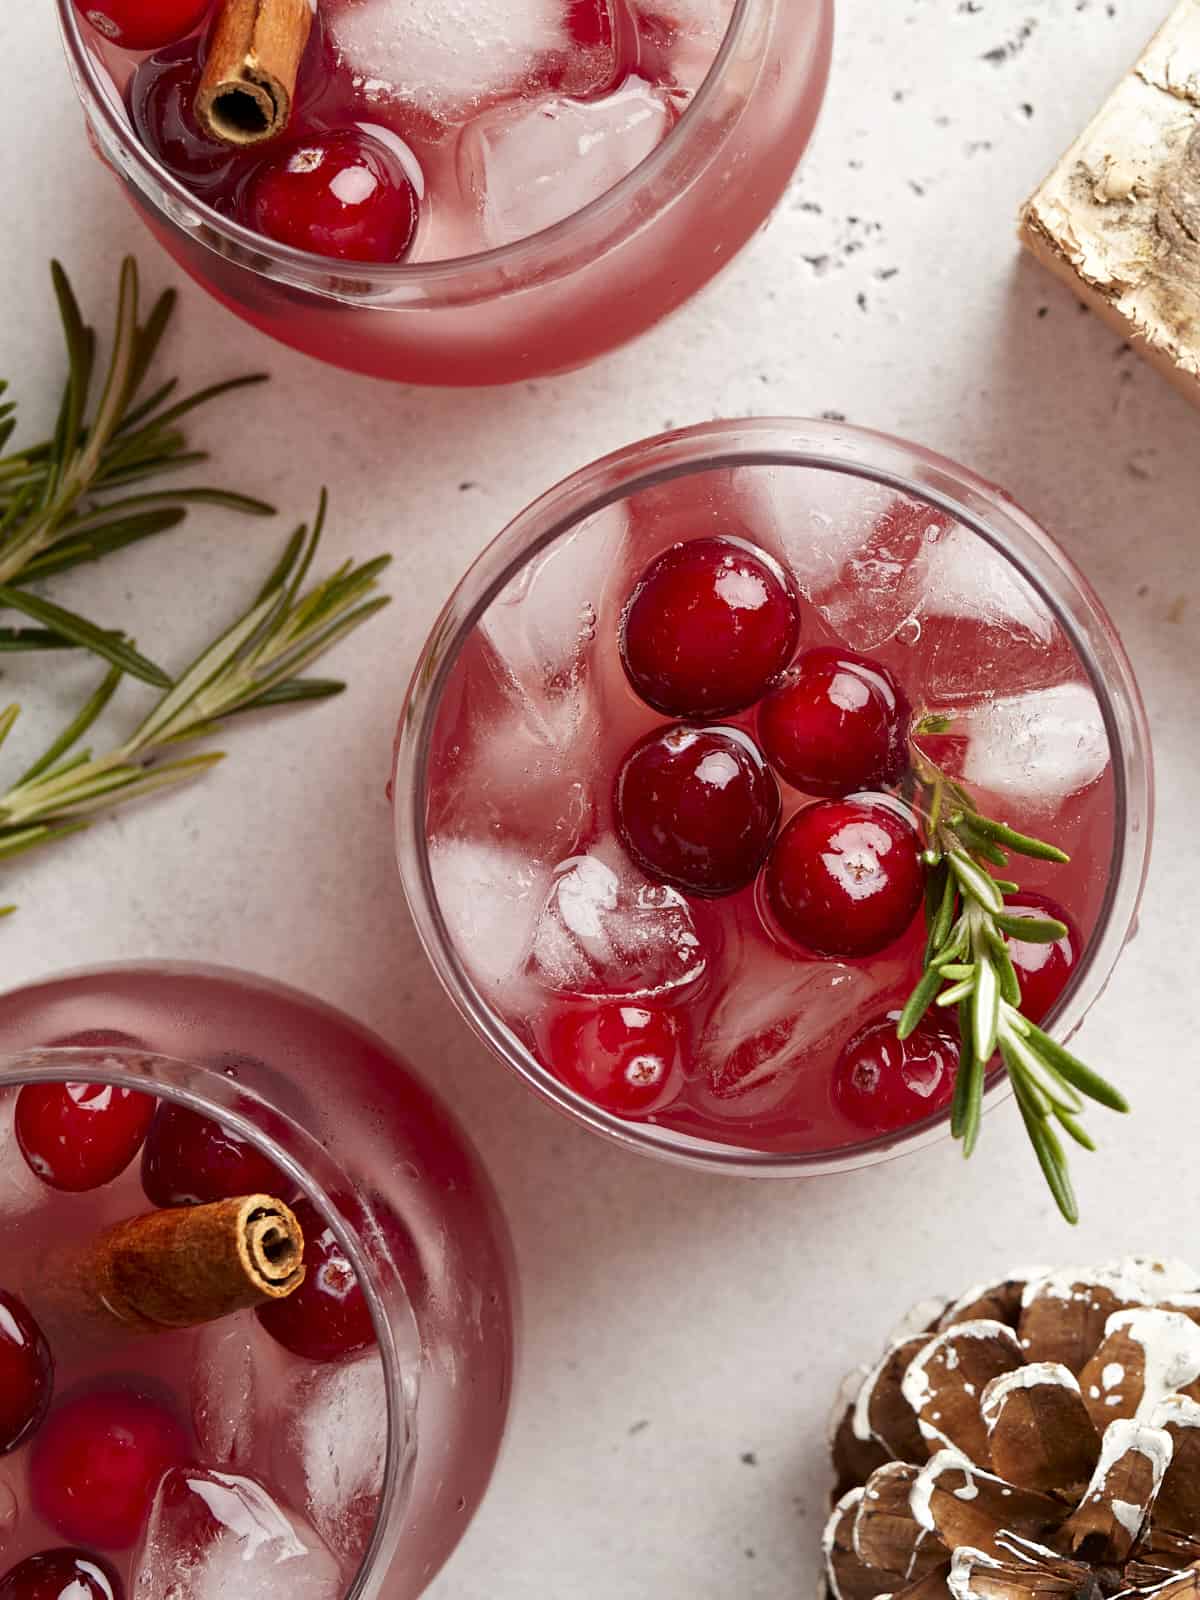 4 Ingredient Christmas Punch